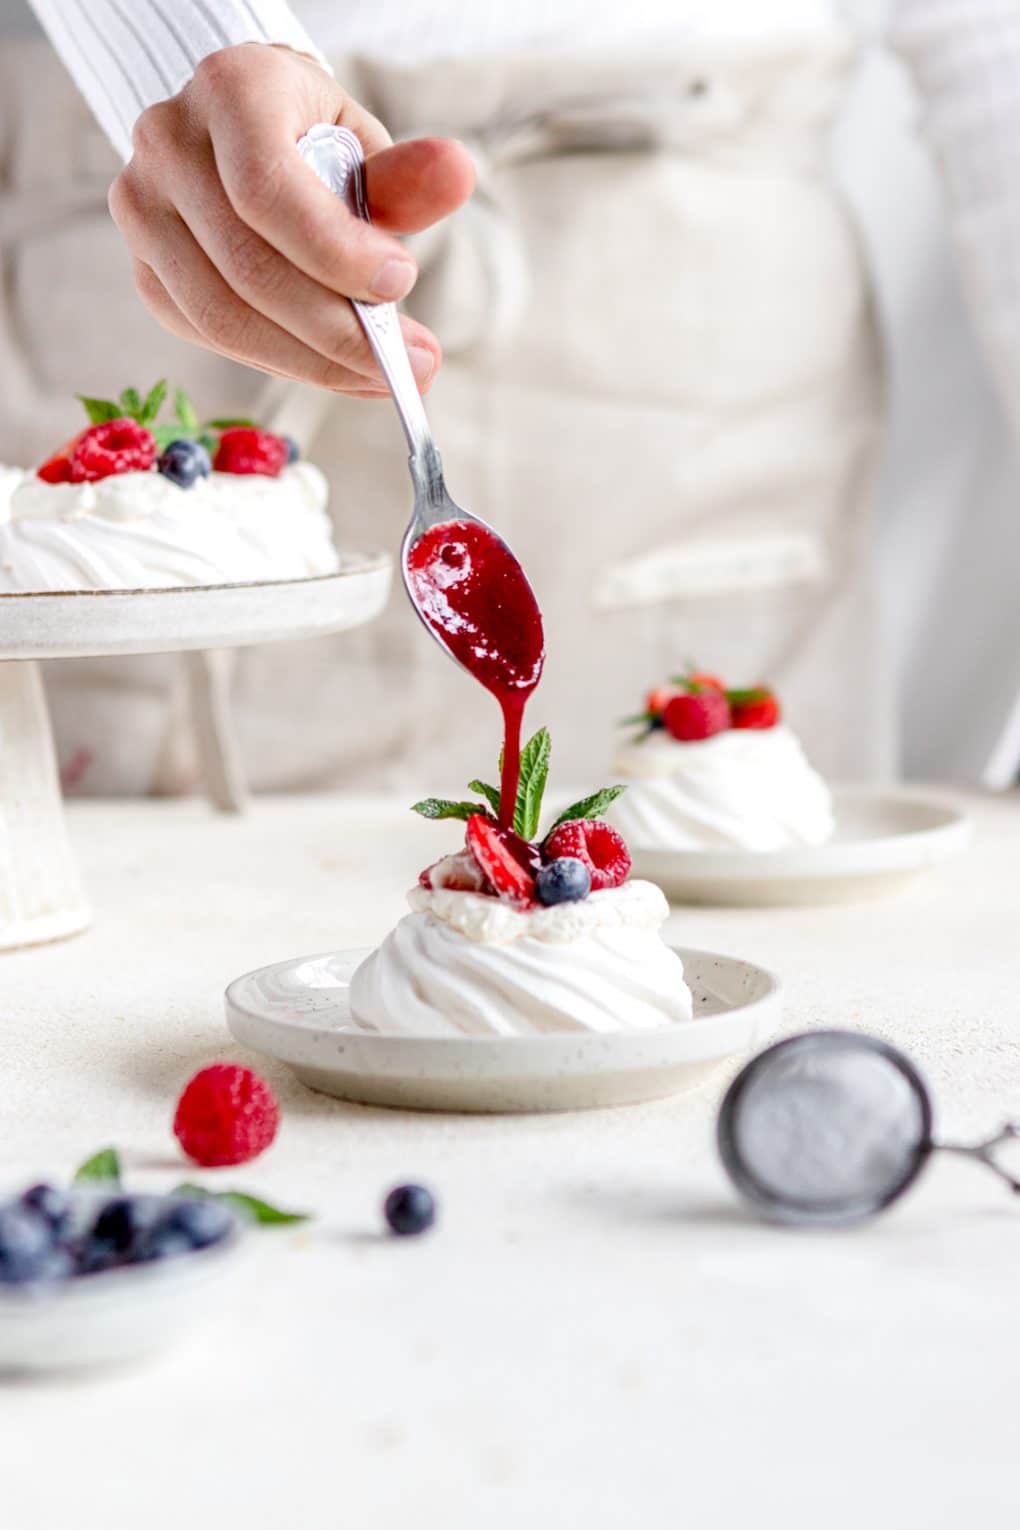 drizzling syrup on the Mini Pavlovas